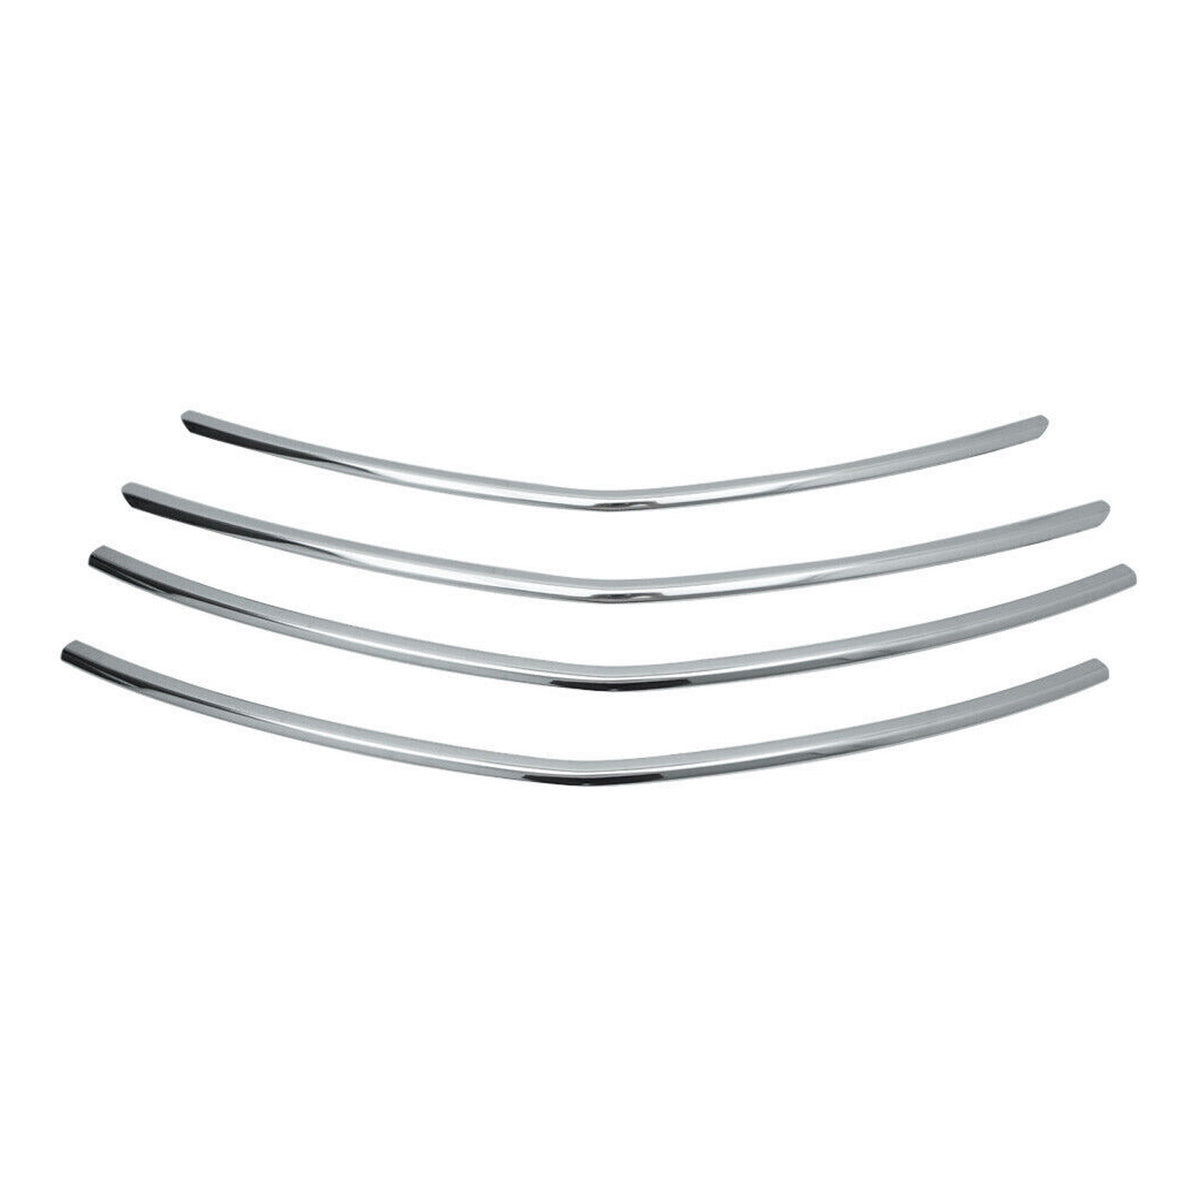 Radiator grille strips grill strips for Opel Vivaro 2014-2019 stainless steel silver 4 pieces